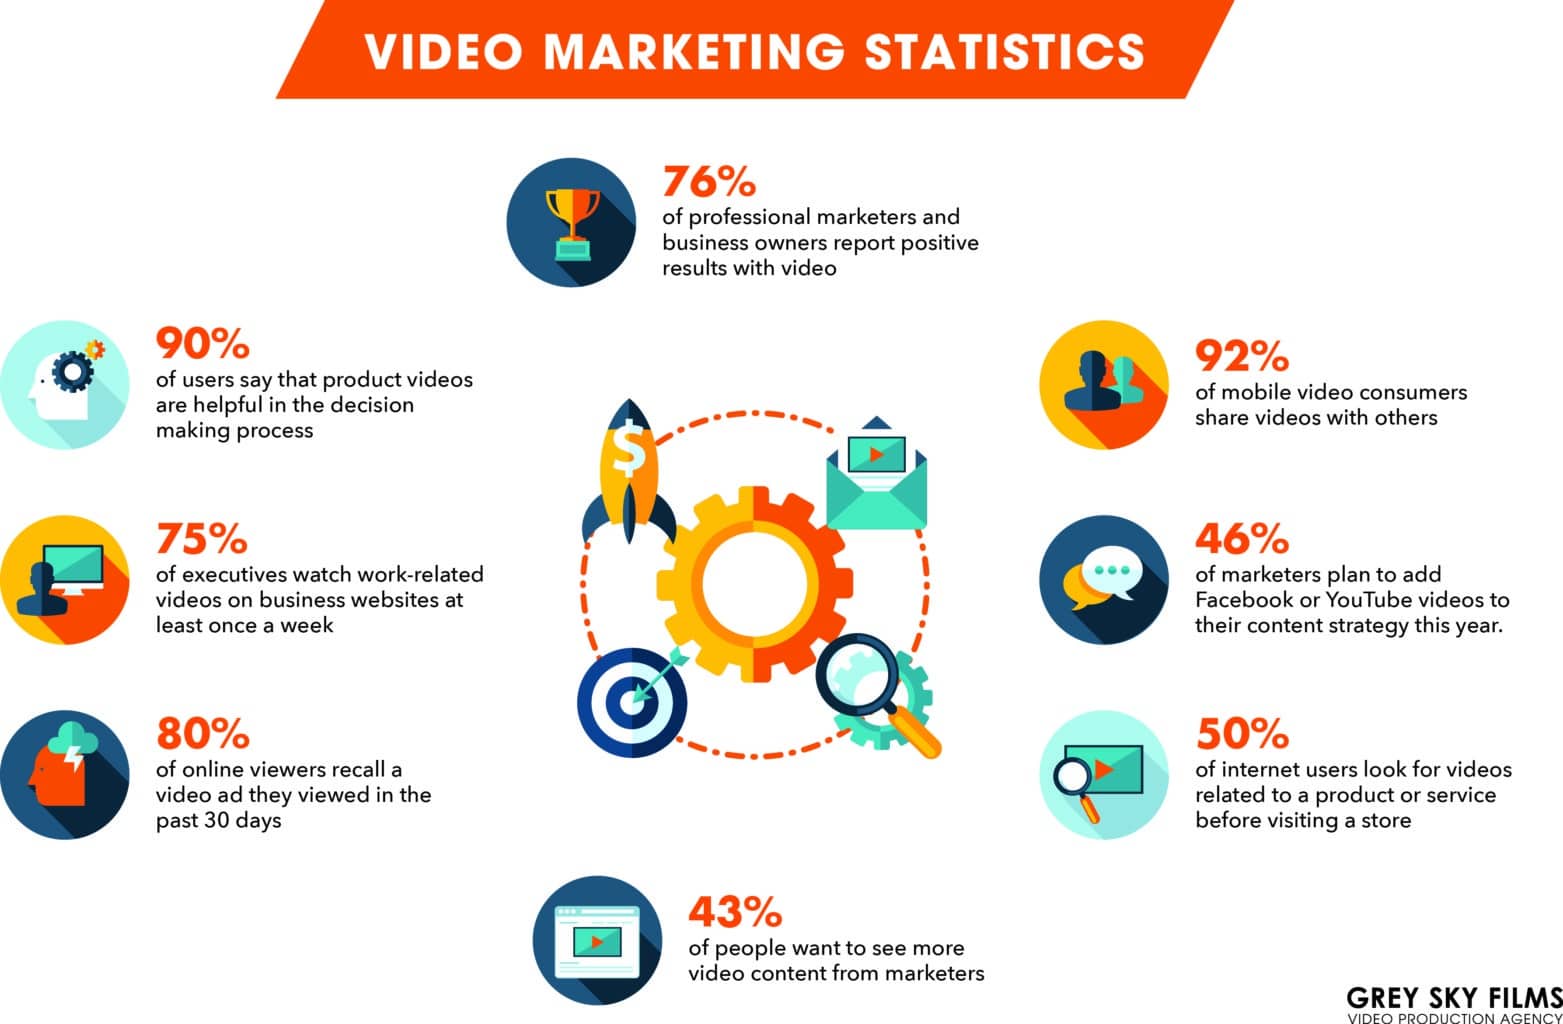 The video marketing statistics listed above are from Grey Sky Films